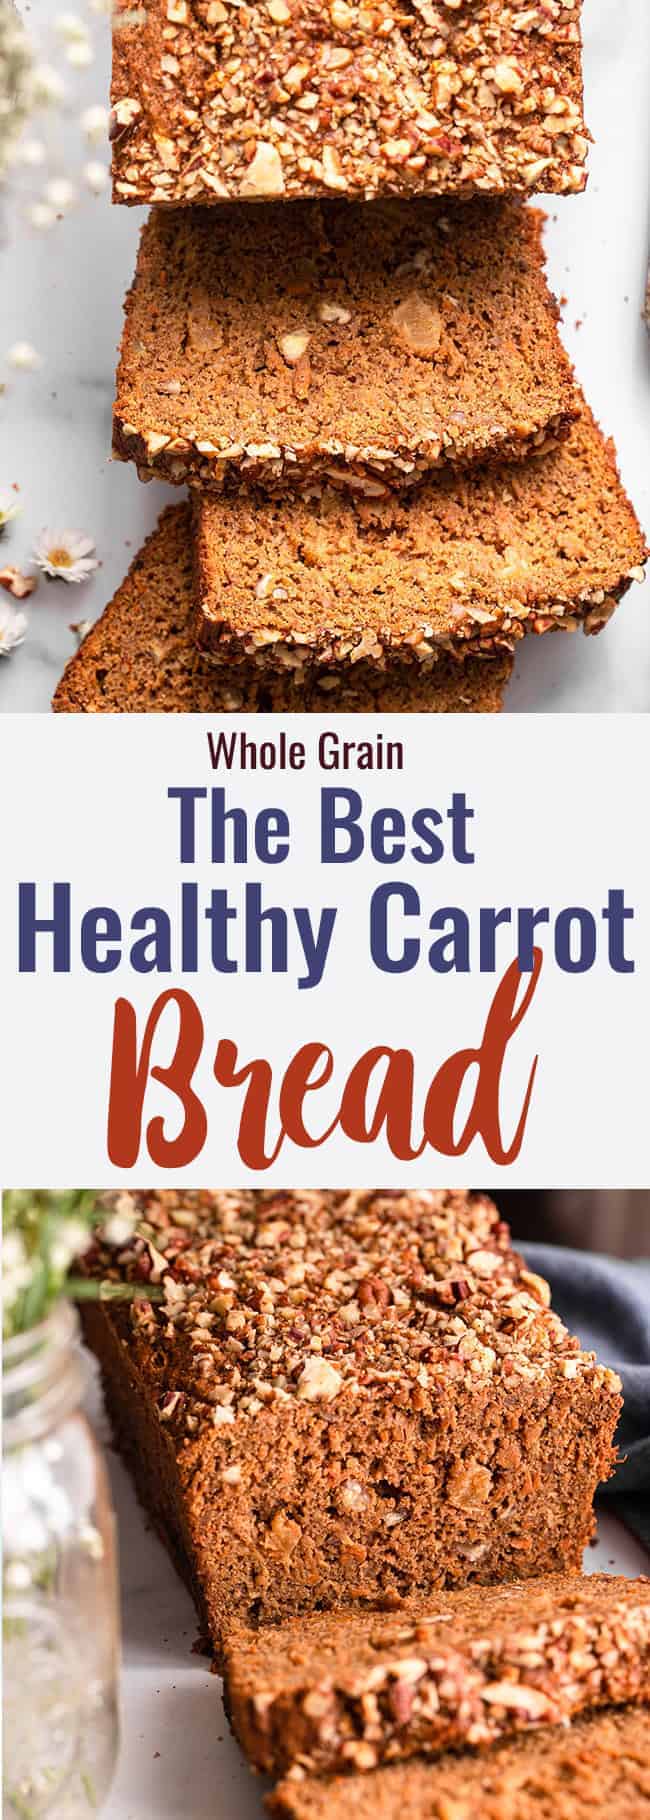 Healthy Carrot Bread photo collage